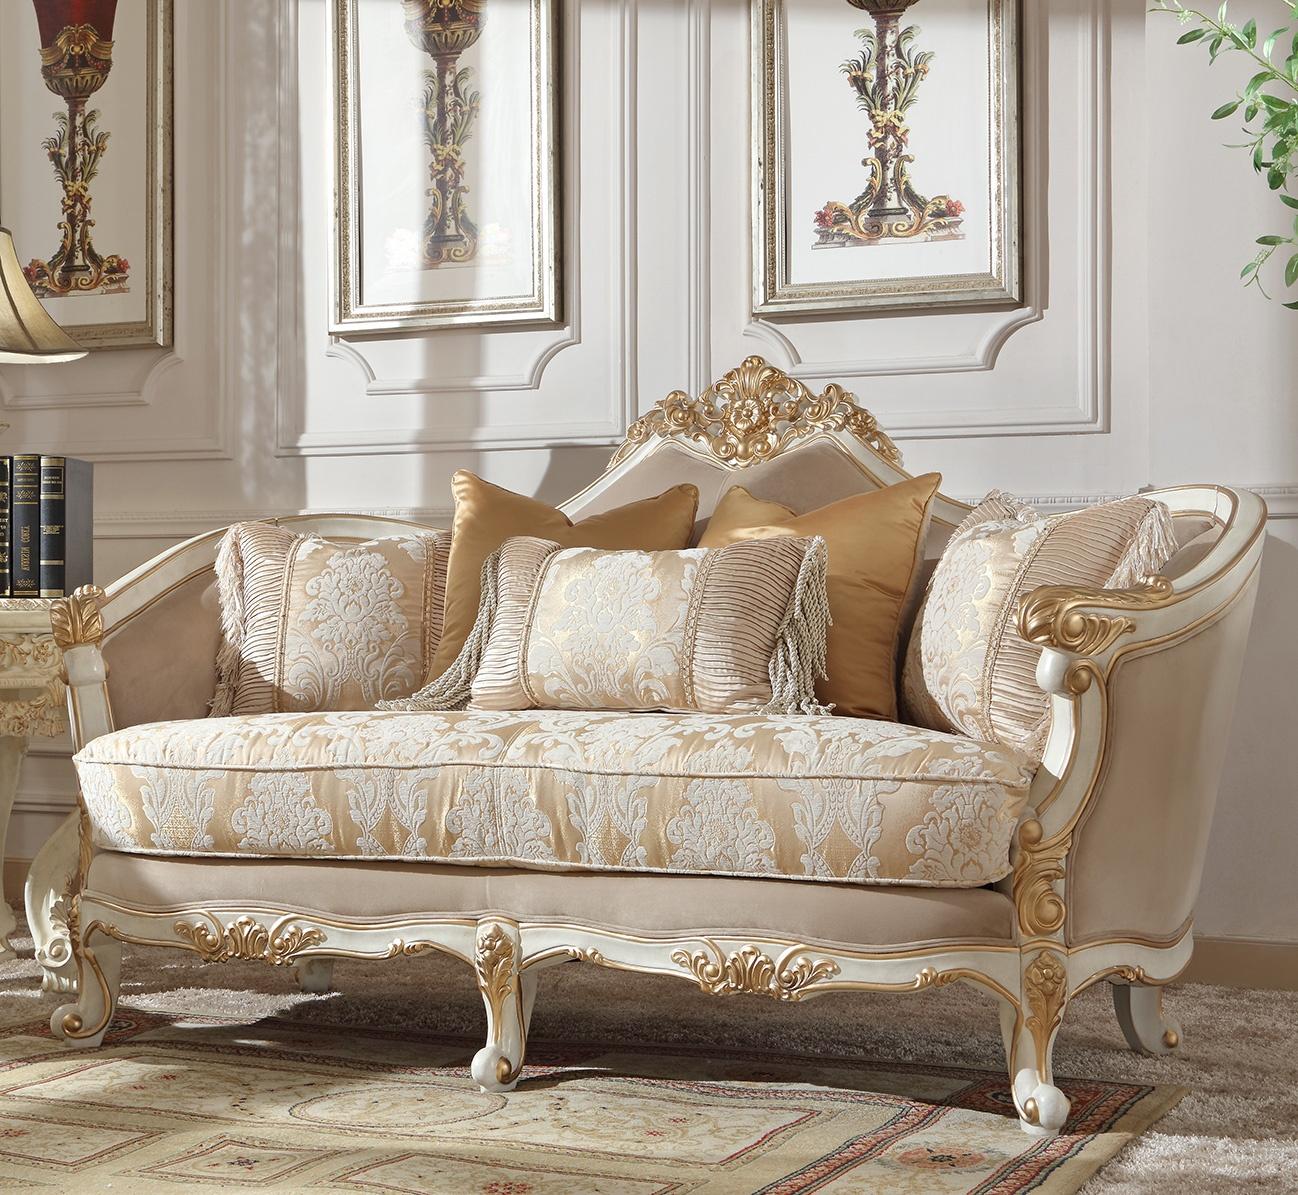 

    
Plantation Cove White Loveseat Carved Wood Traditional Homey Design HD-2669
